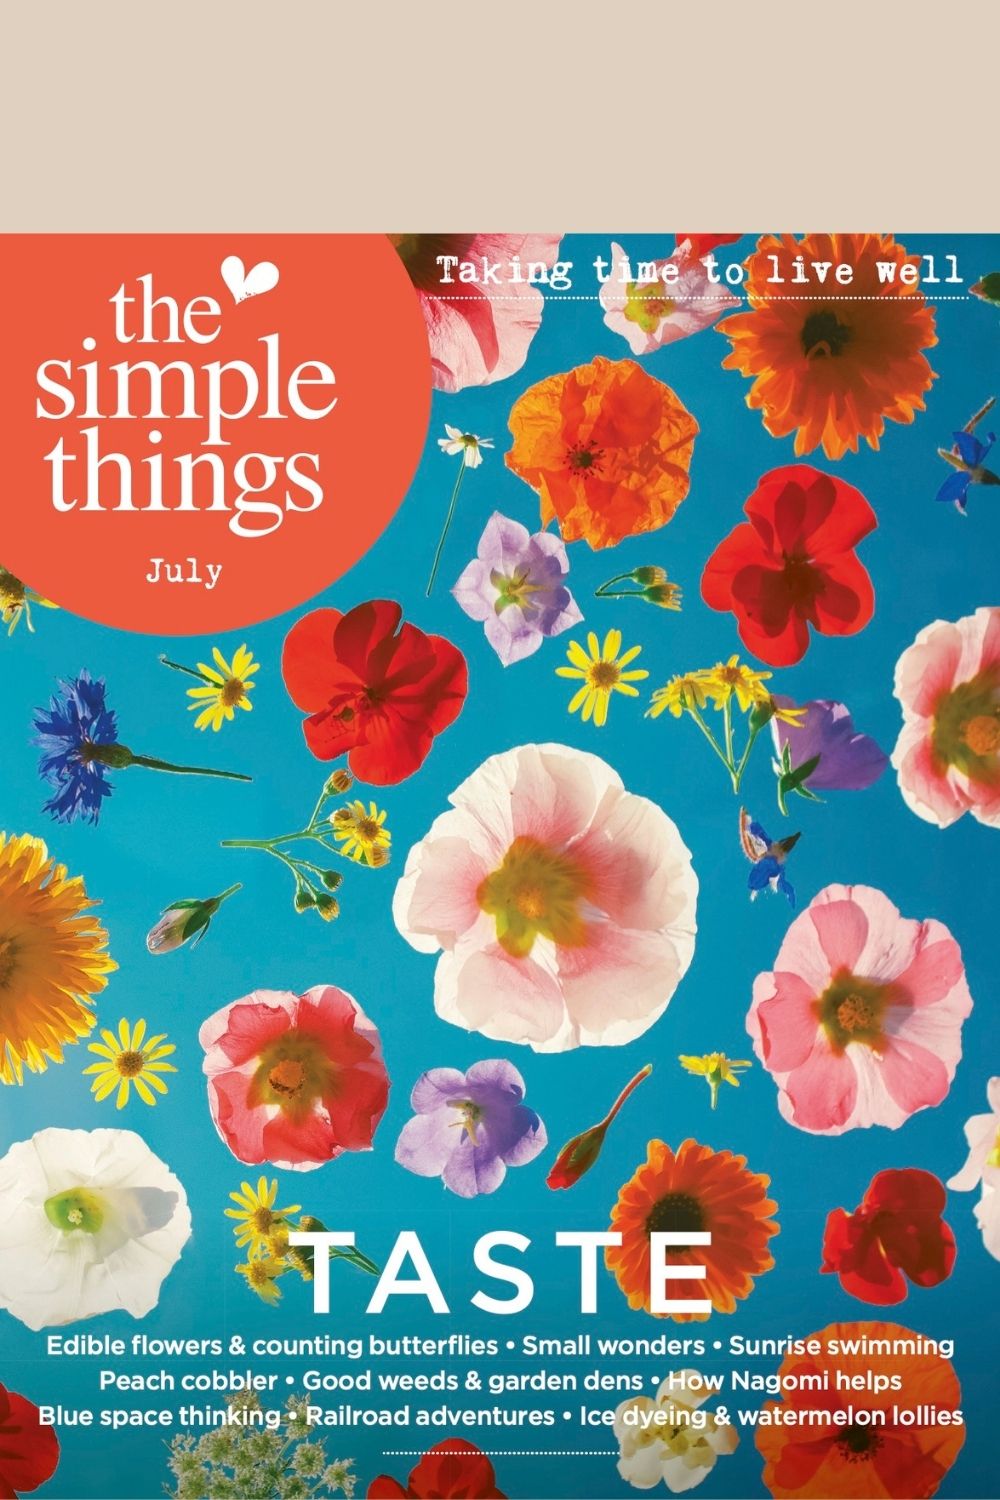 The Simple Things Issue 121 July